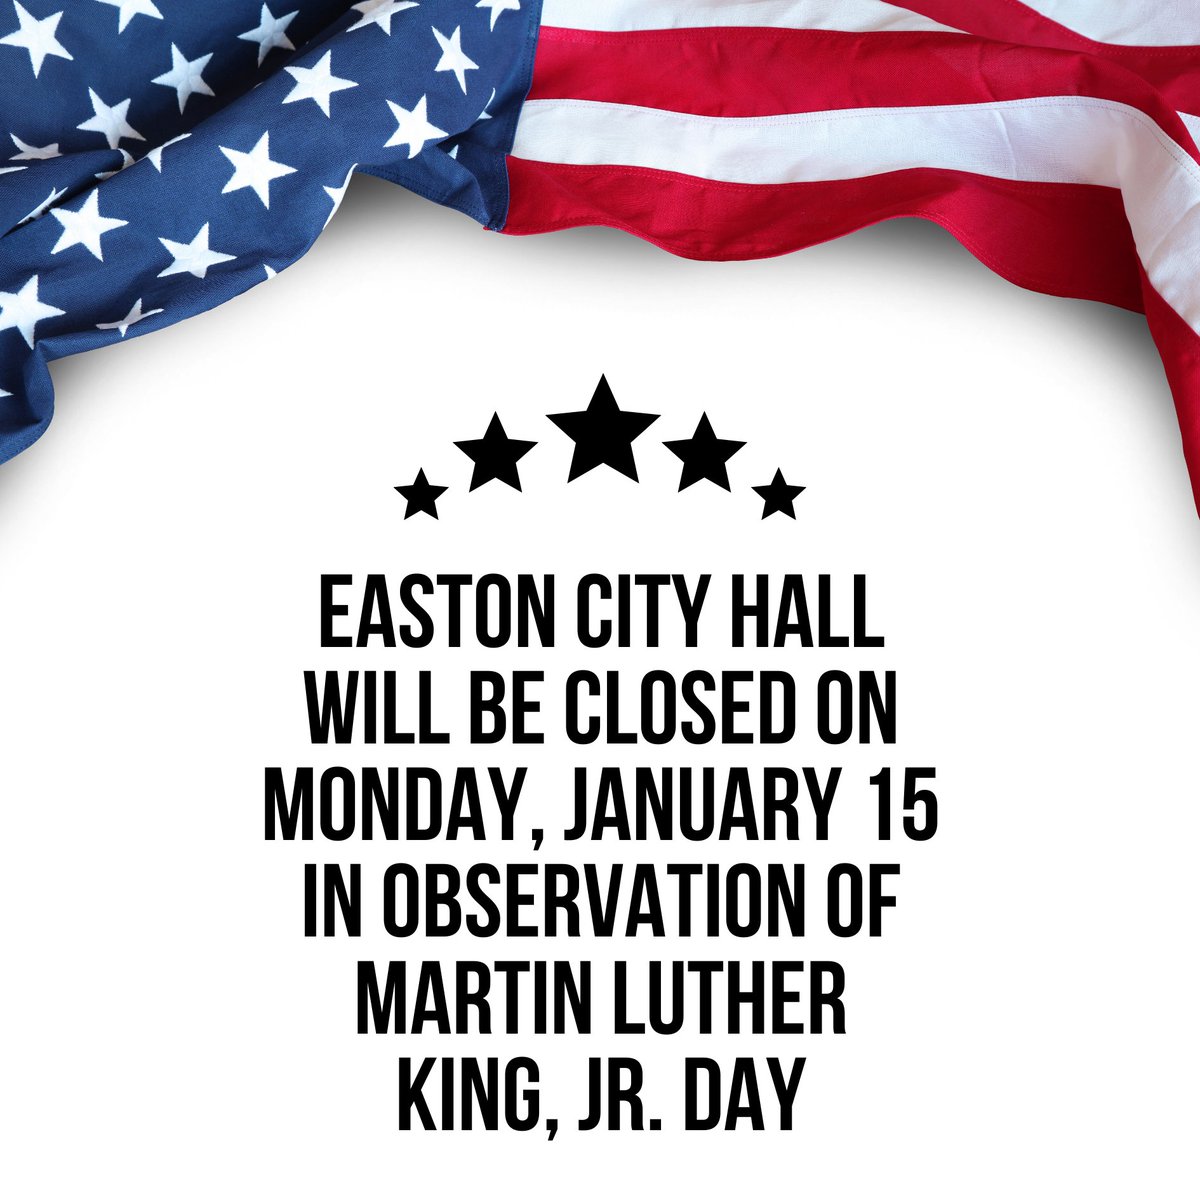 Final reminder - City Hall is closed on Monday 1/15 for the holiday. If you need to reach our staff, please do so today - Friday 1/12 - by 4:30 pm. easton-pa.com